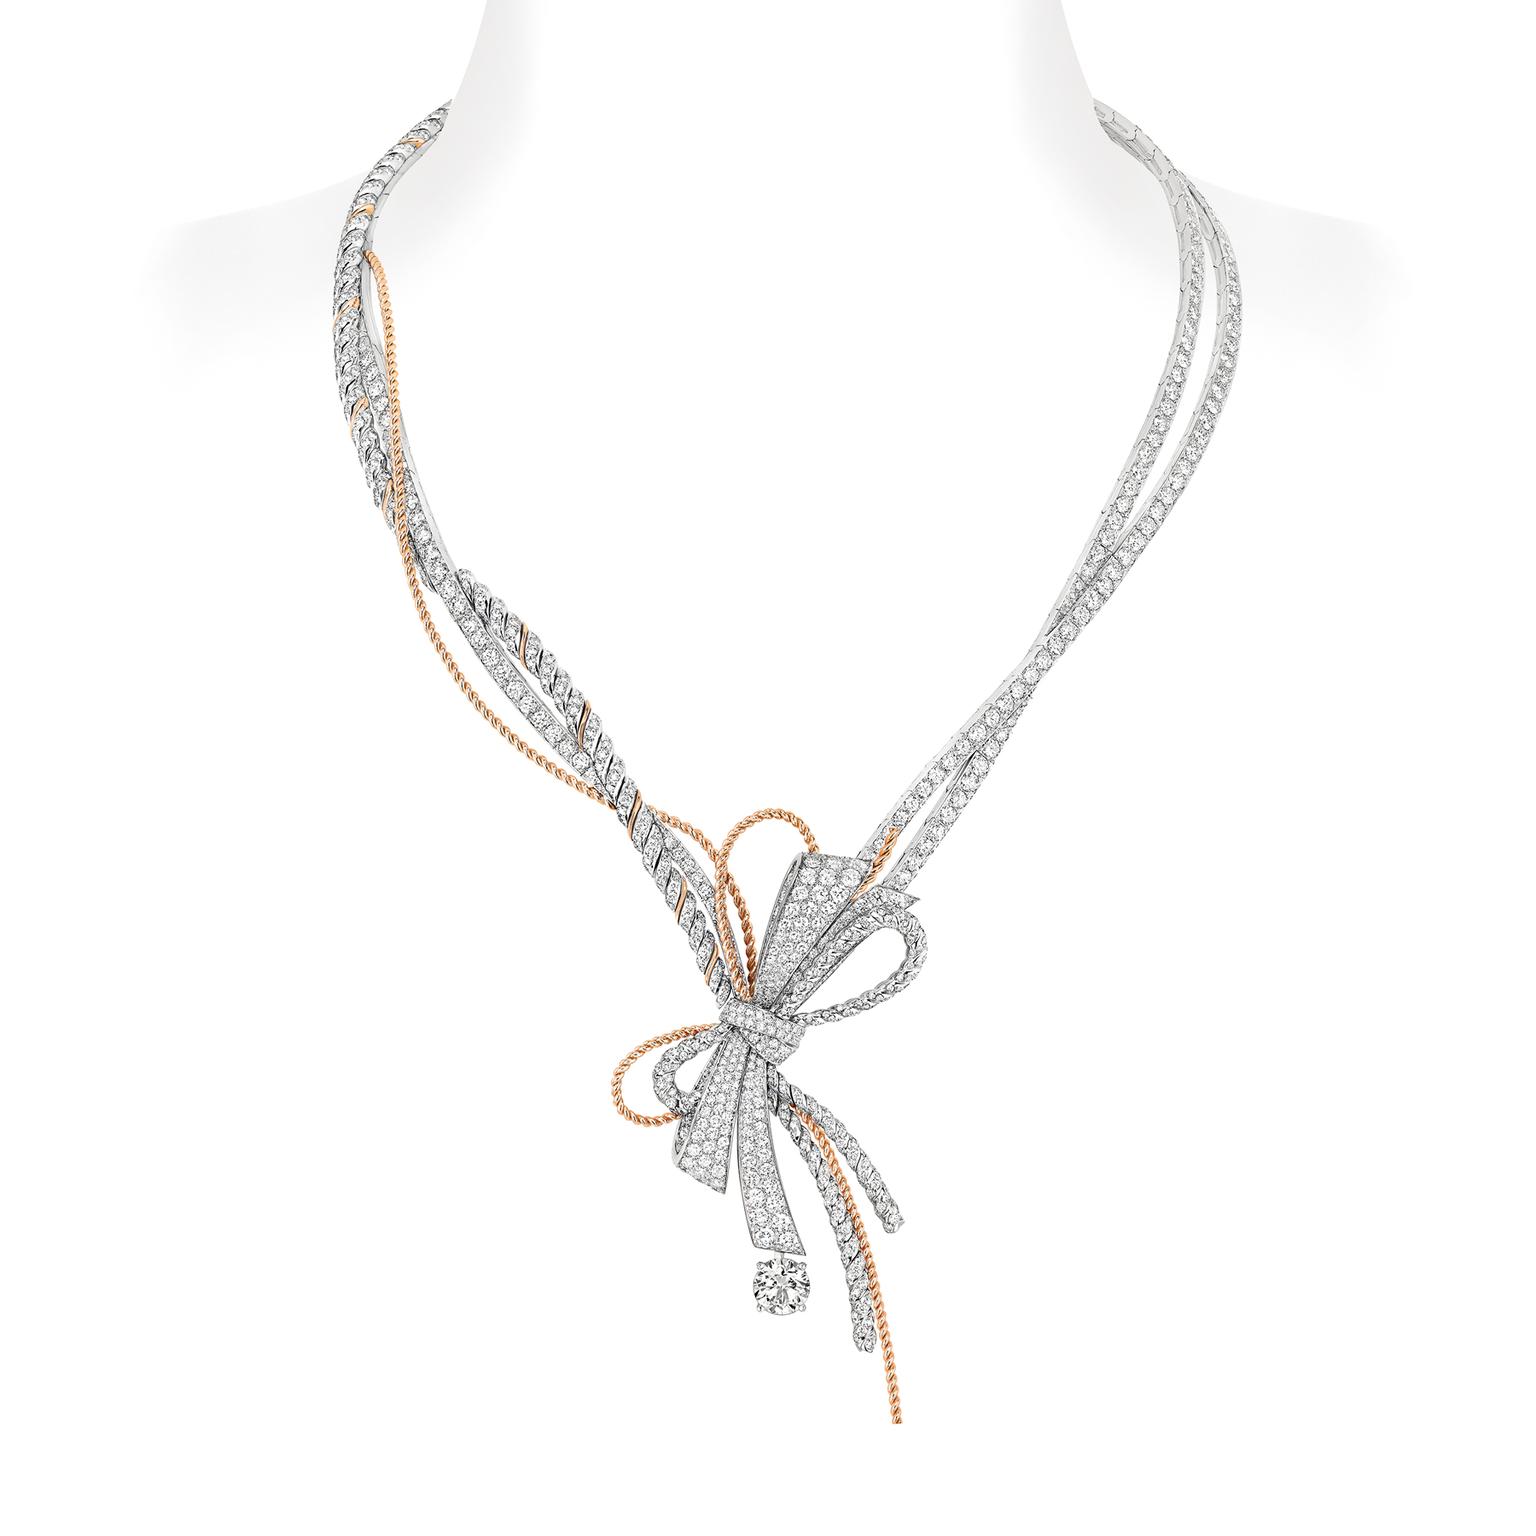 Chaumet insolence high jewellery necklace 